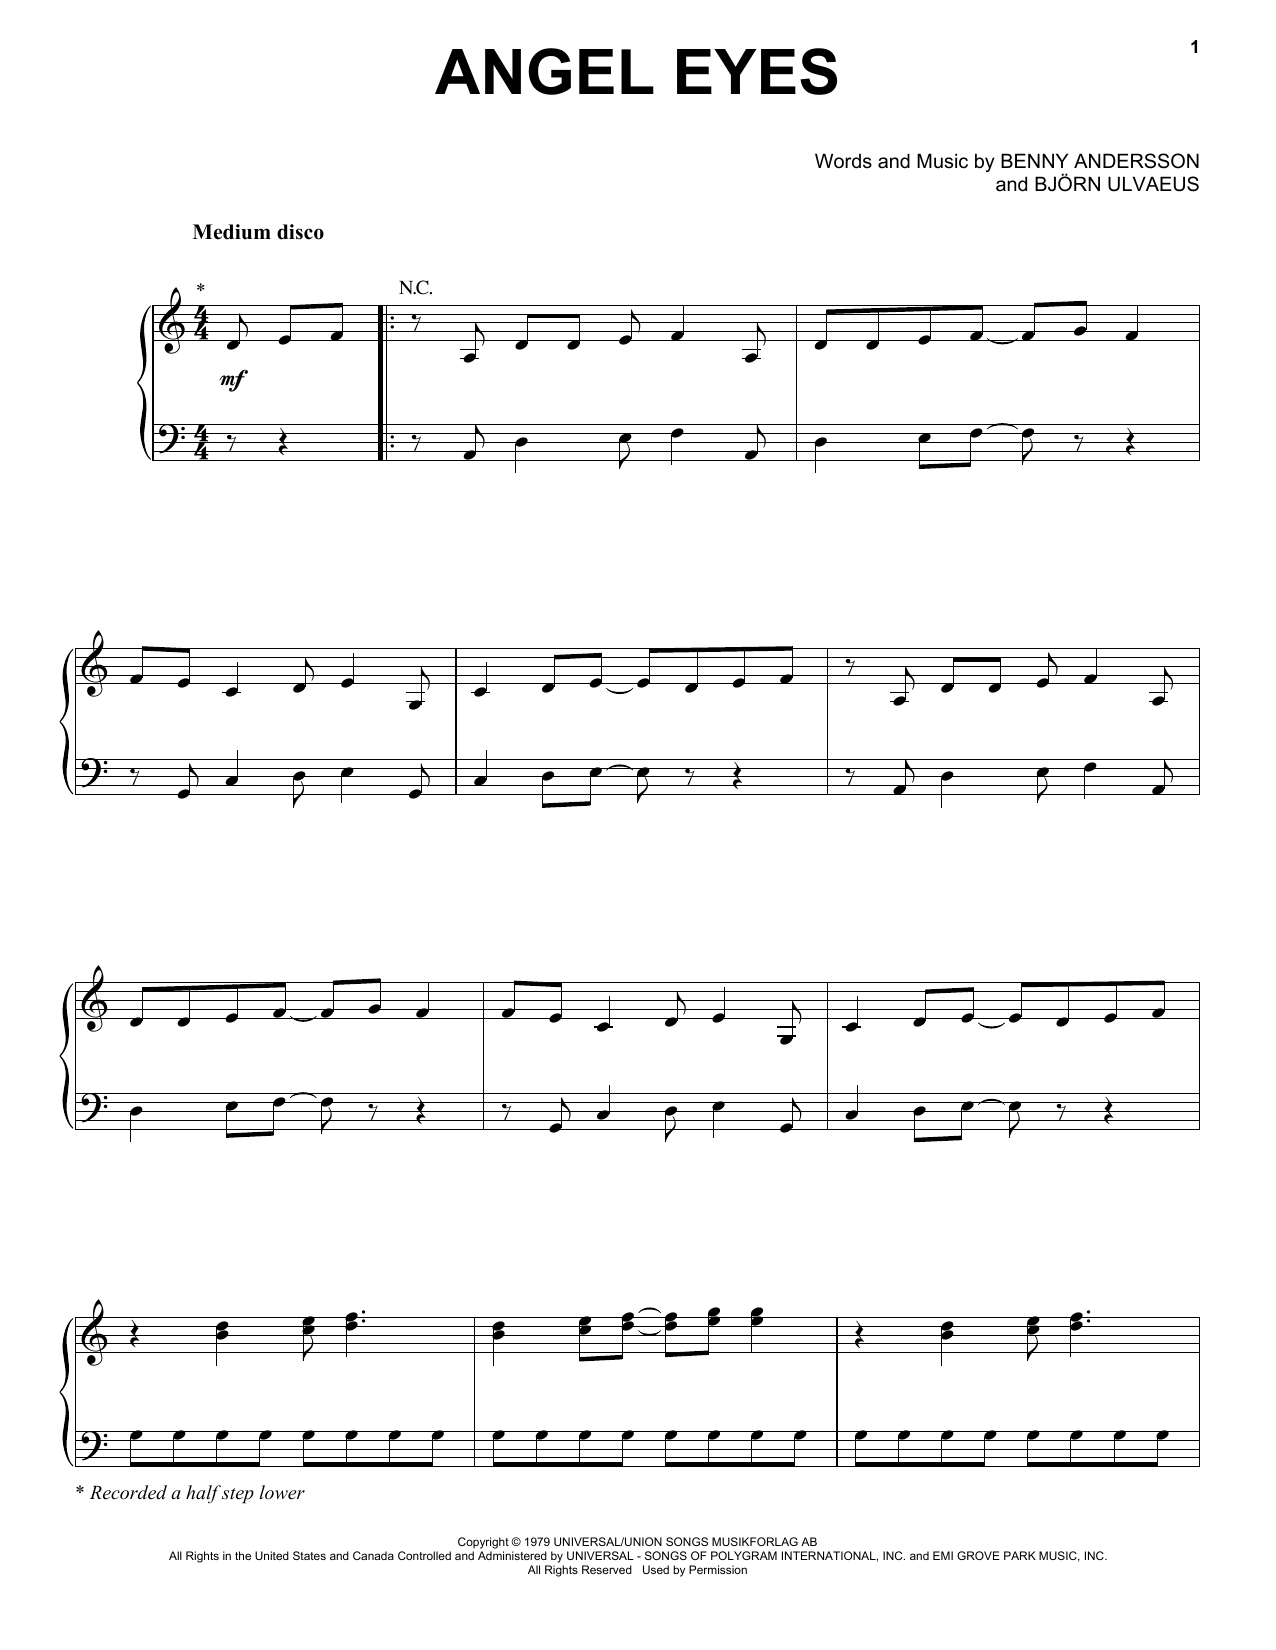 ABBA Angeleyes sheet music notes and chords. Download Printable PDF.